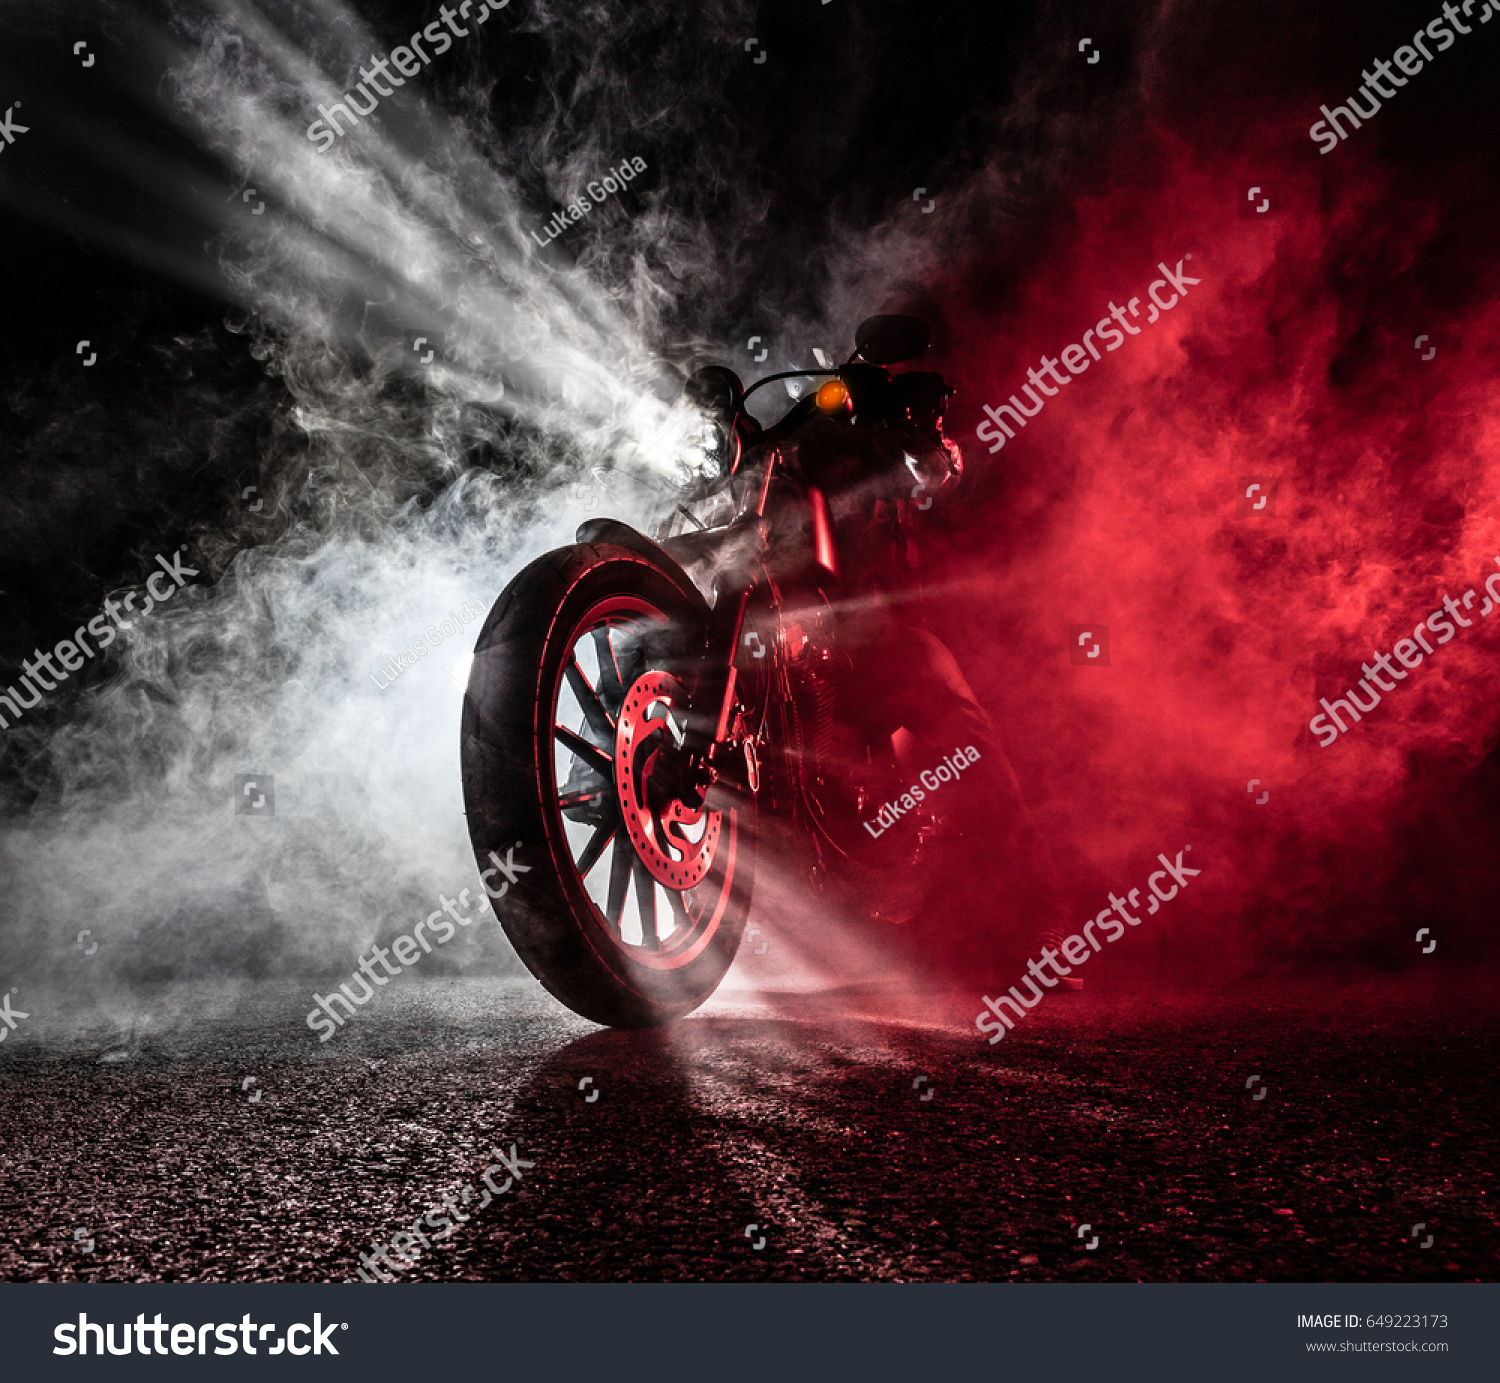 High power motorcycle chopper at night. Smoke on background. #649223173